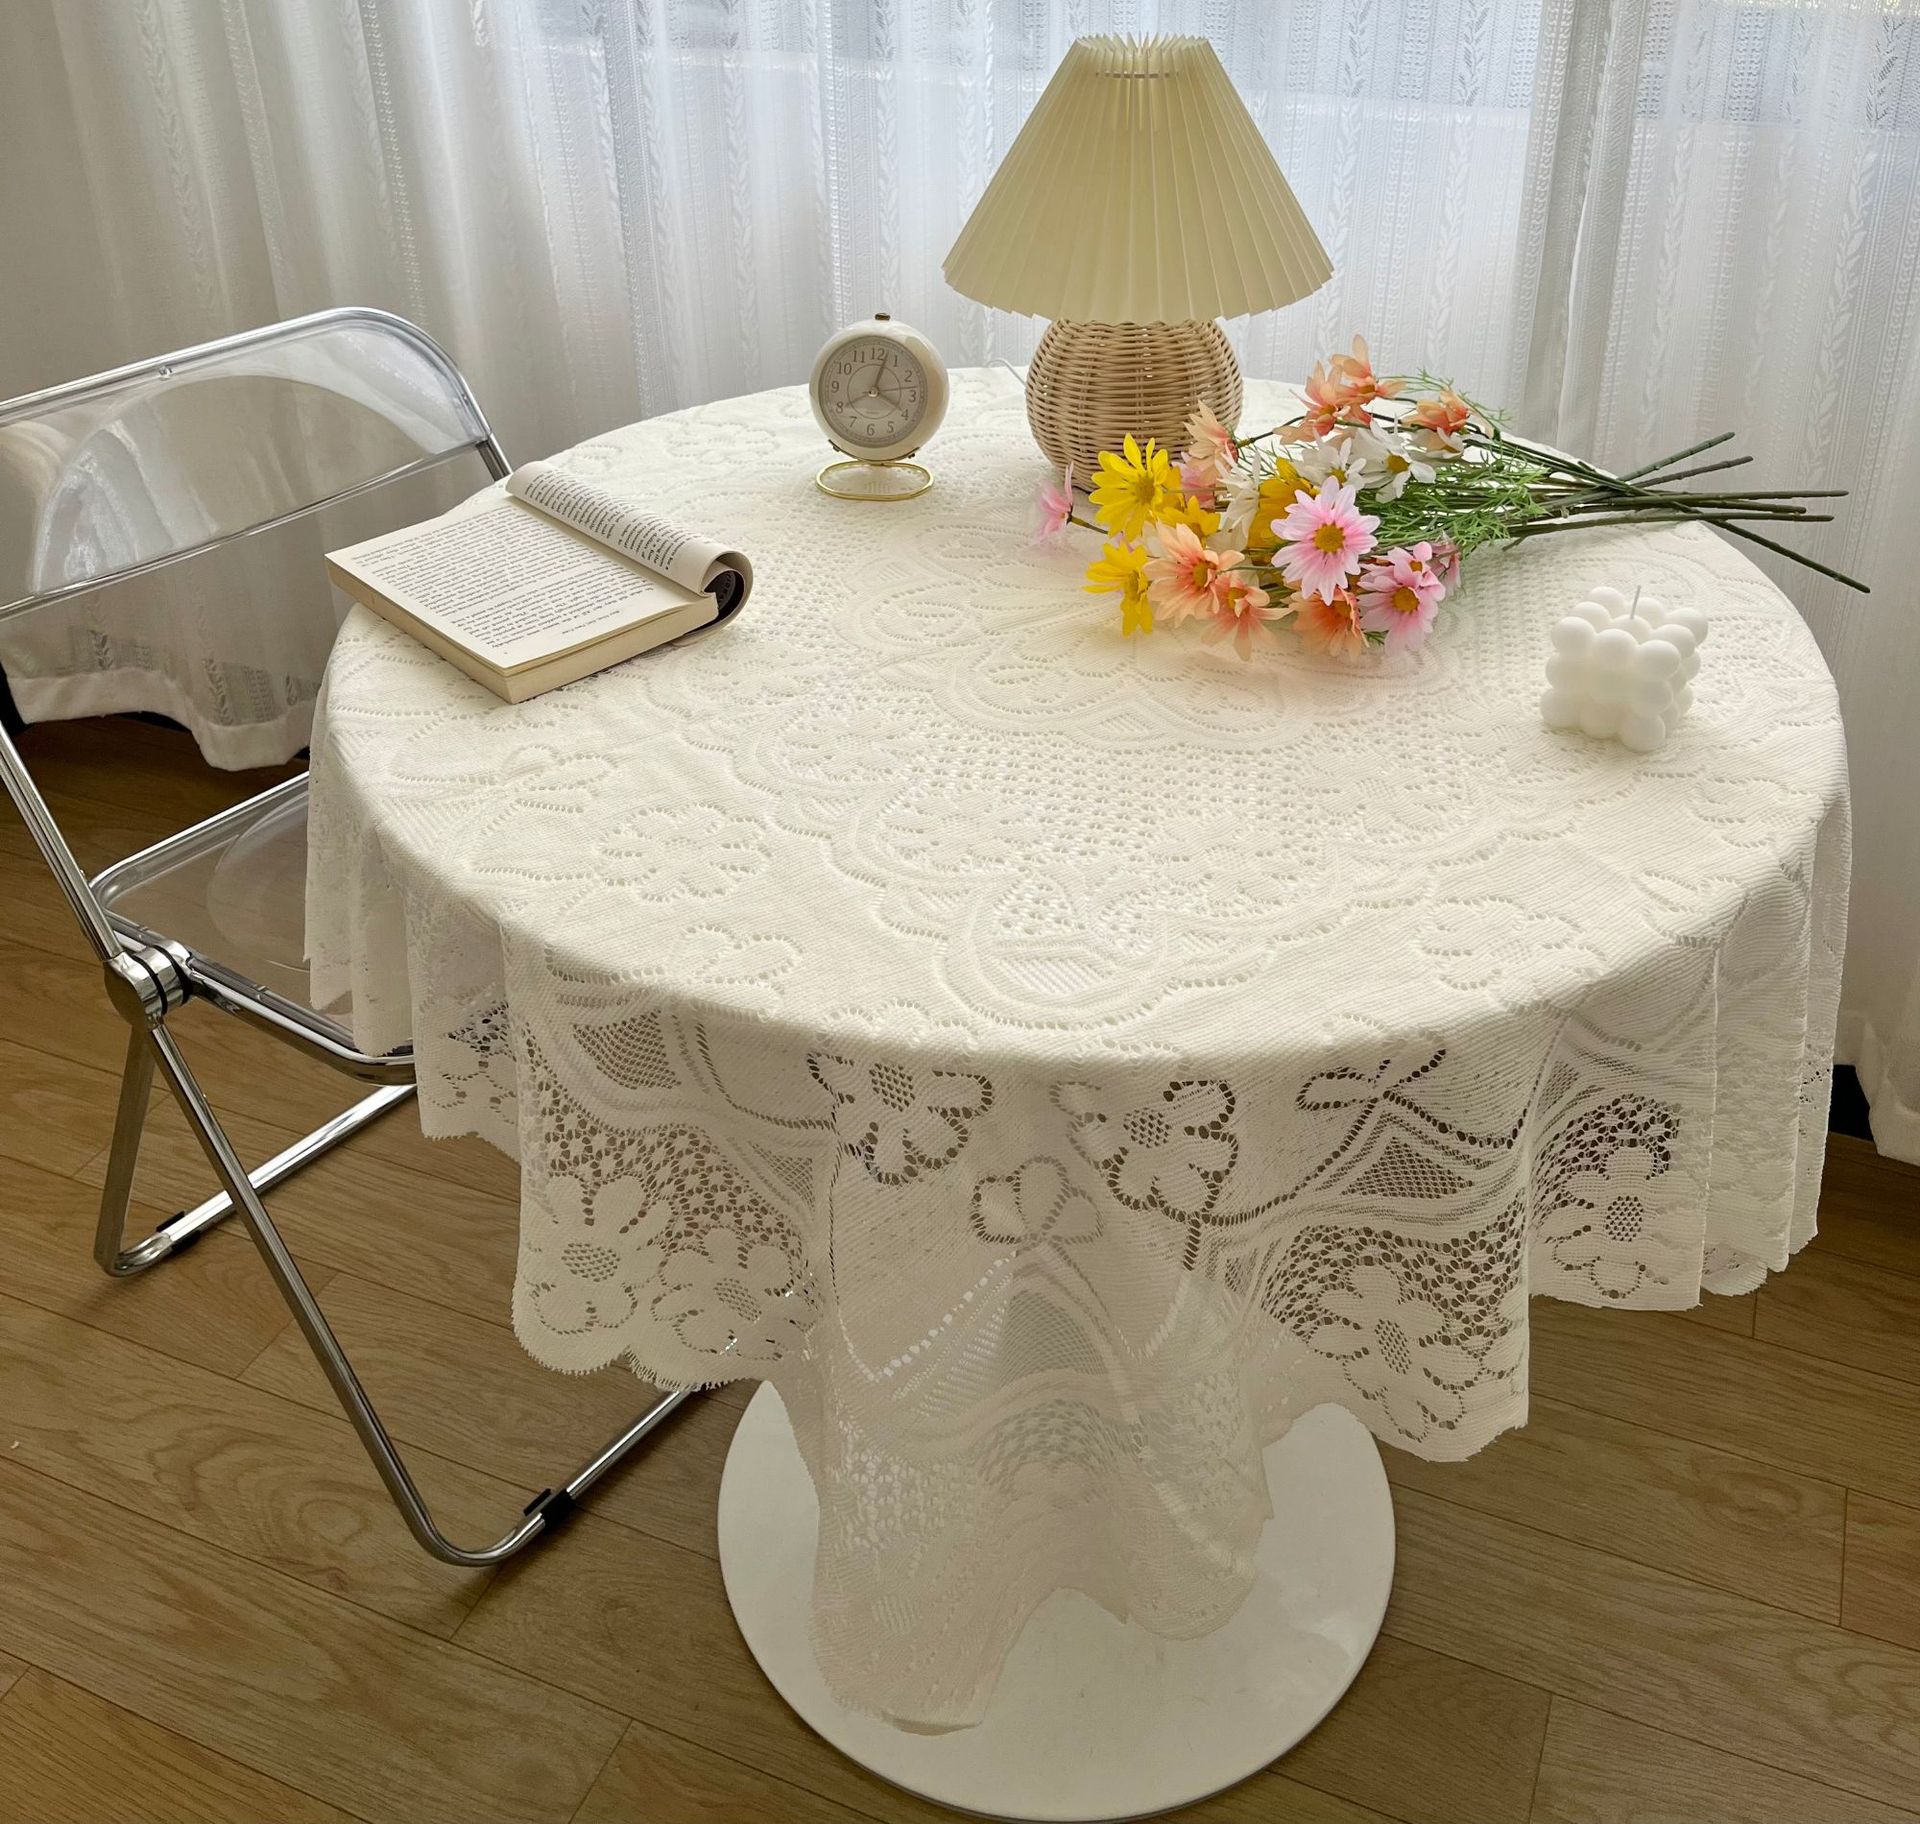 Lace Tablecloth Ins Vintage Crocheted round Table Square Tablecloth Coffee Table Bedside Table Sofa Refrigerator Dustproof Cover Towel